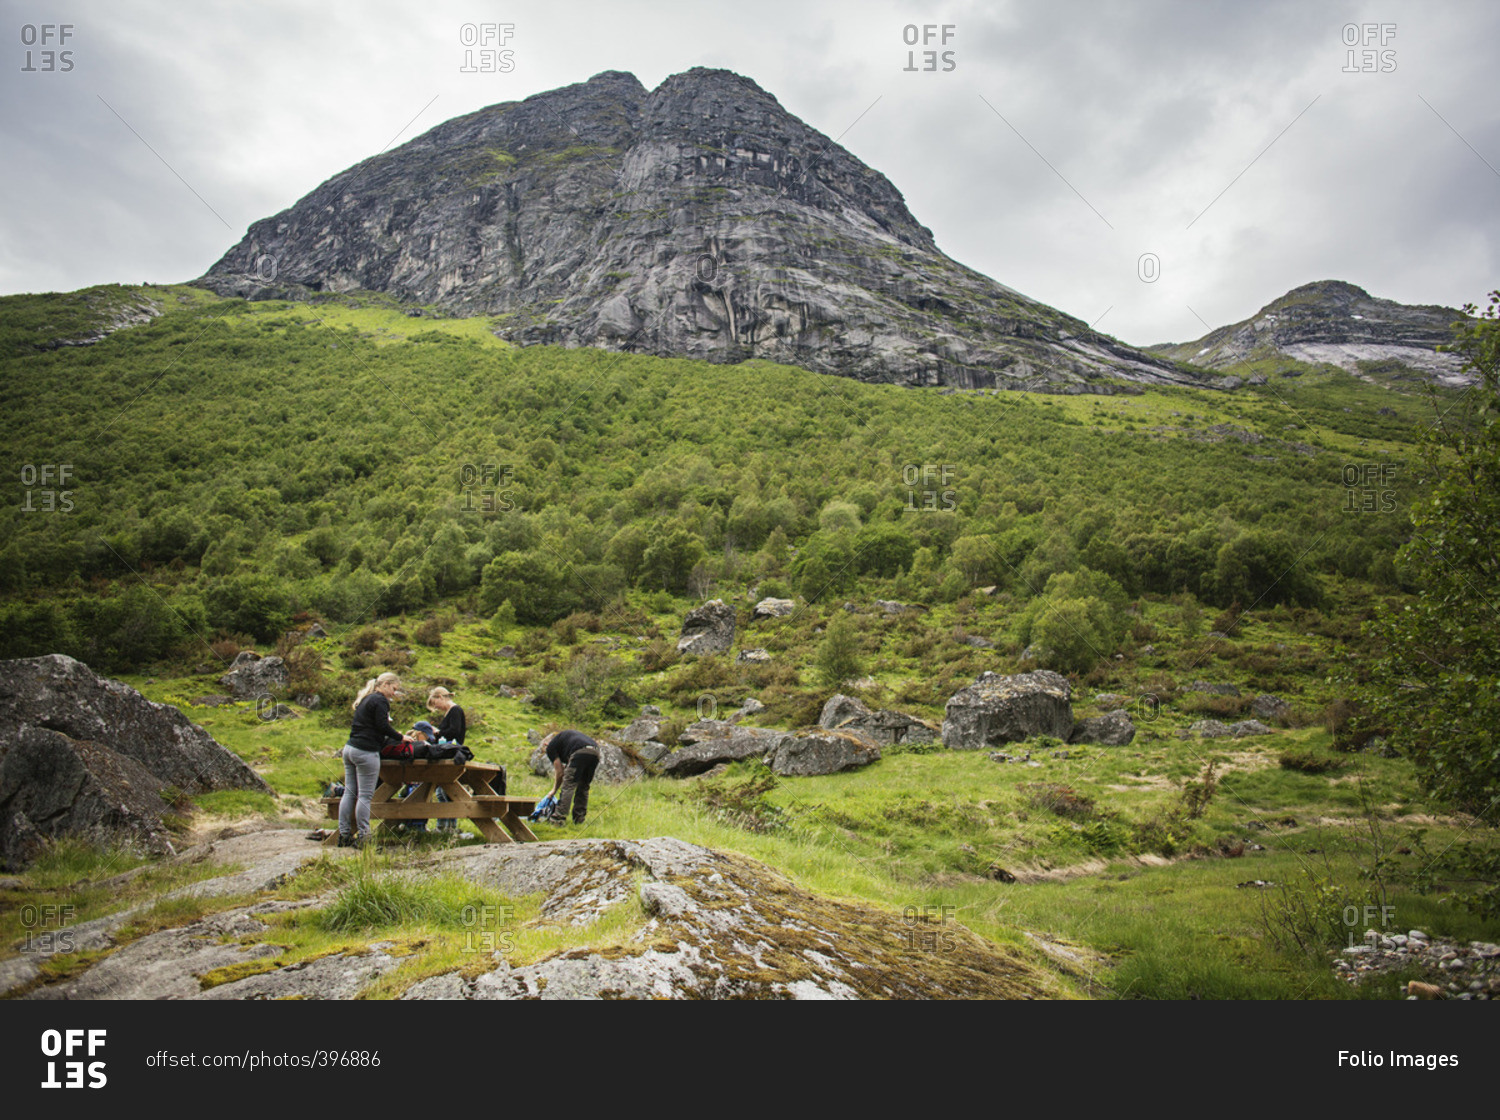 Norway, Glomsdalen, Two women with two girls hiking in mountains